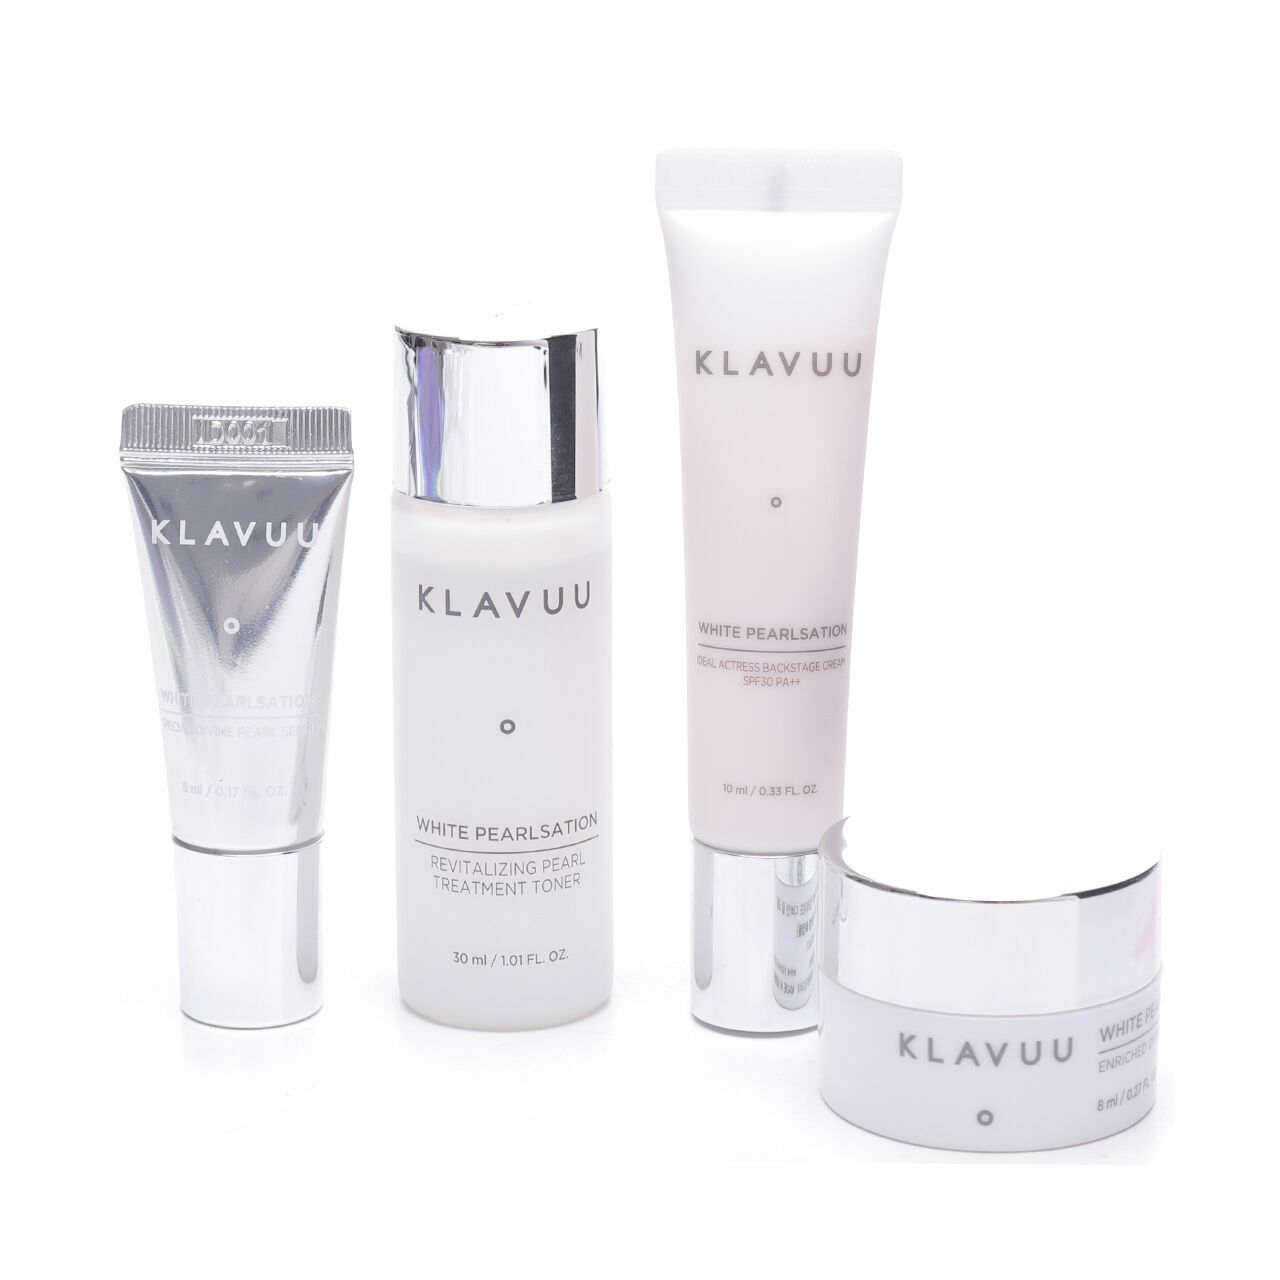 Klavuu White Pearlsation Sets and Palette